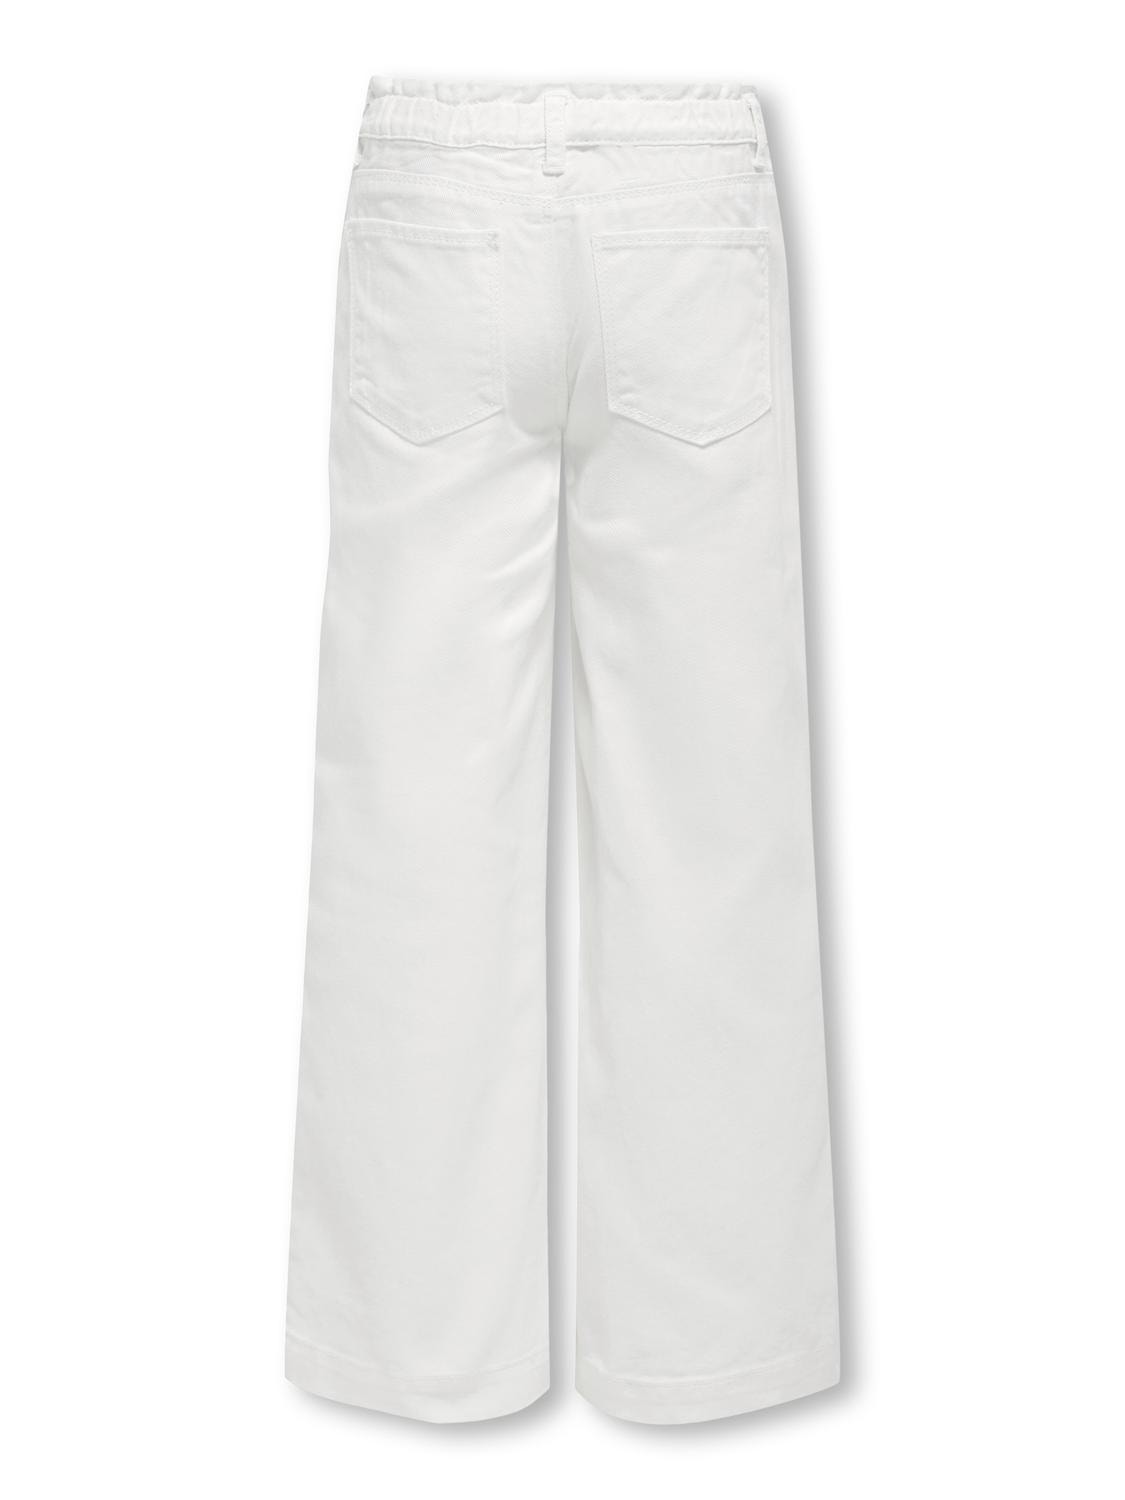 ONLY Jeans Wide Leg Fit -White - 15313135